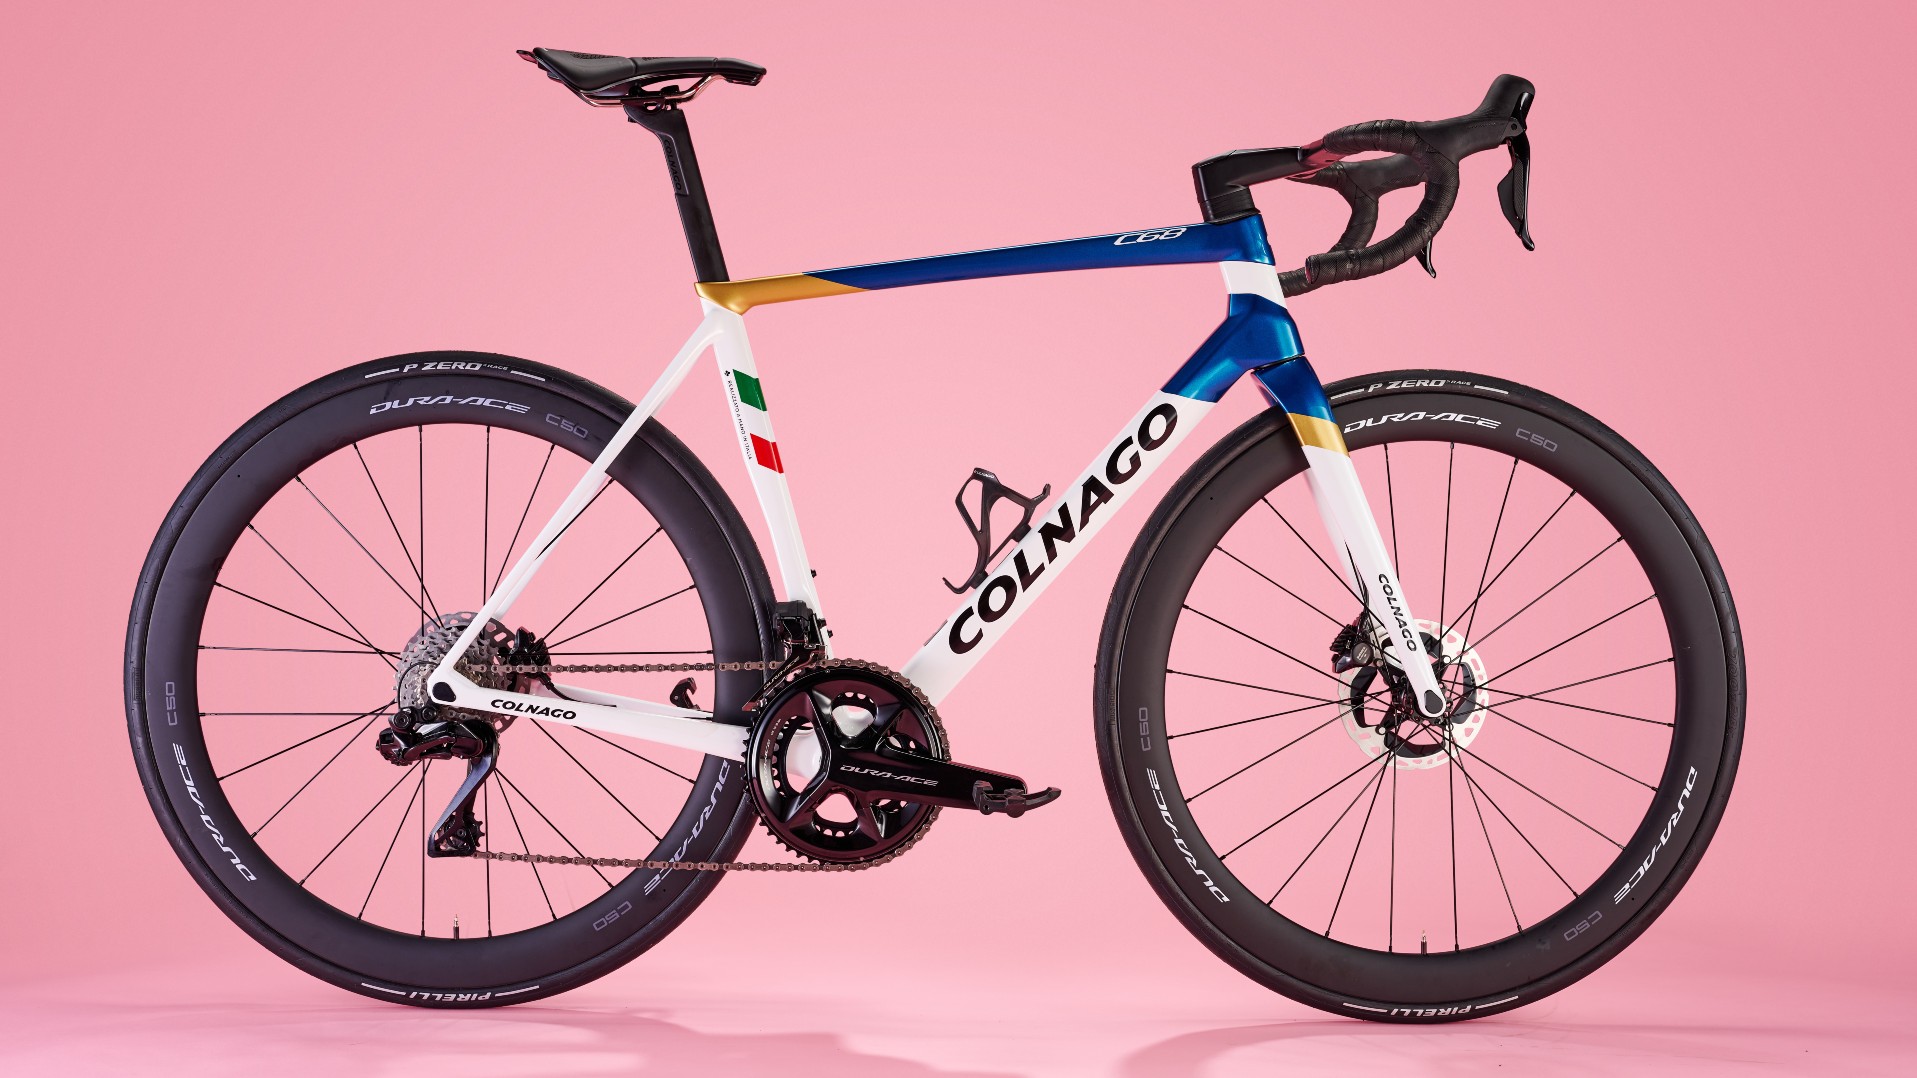 Colnago C68 bike review - tradition and technology in perfect